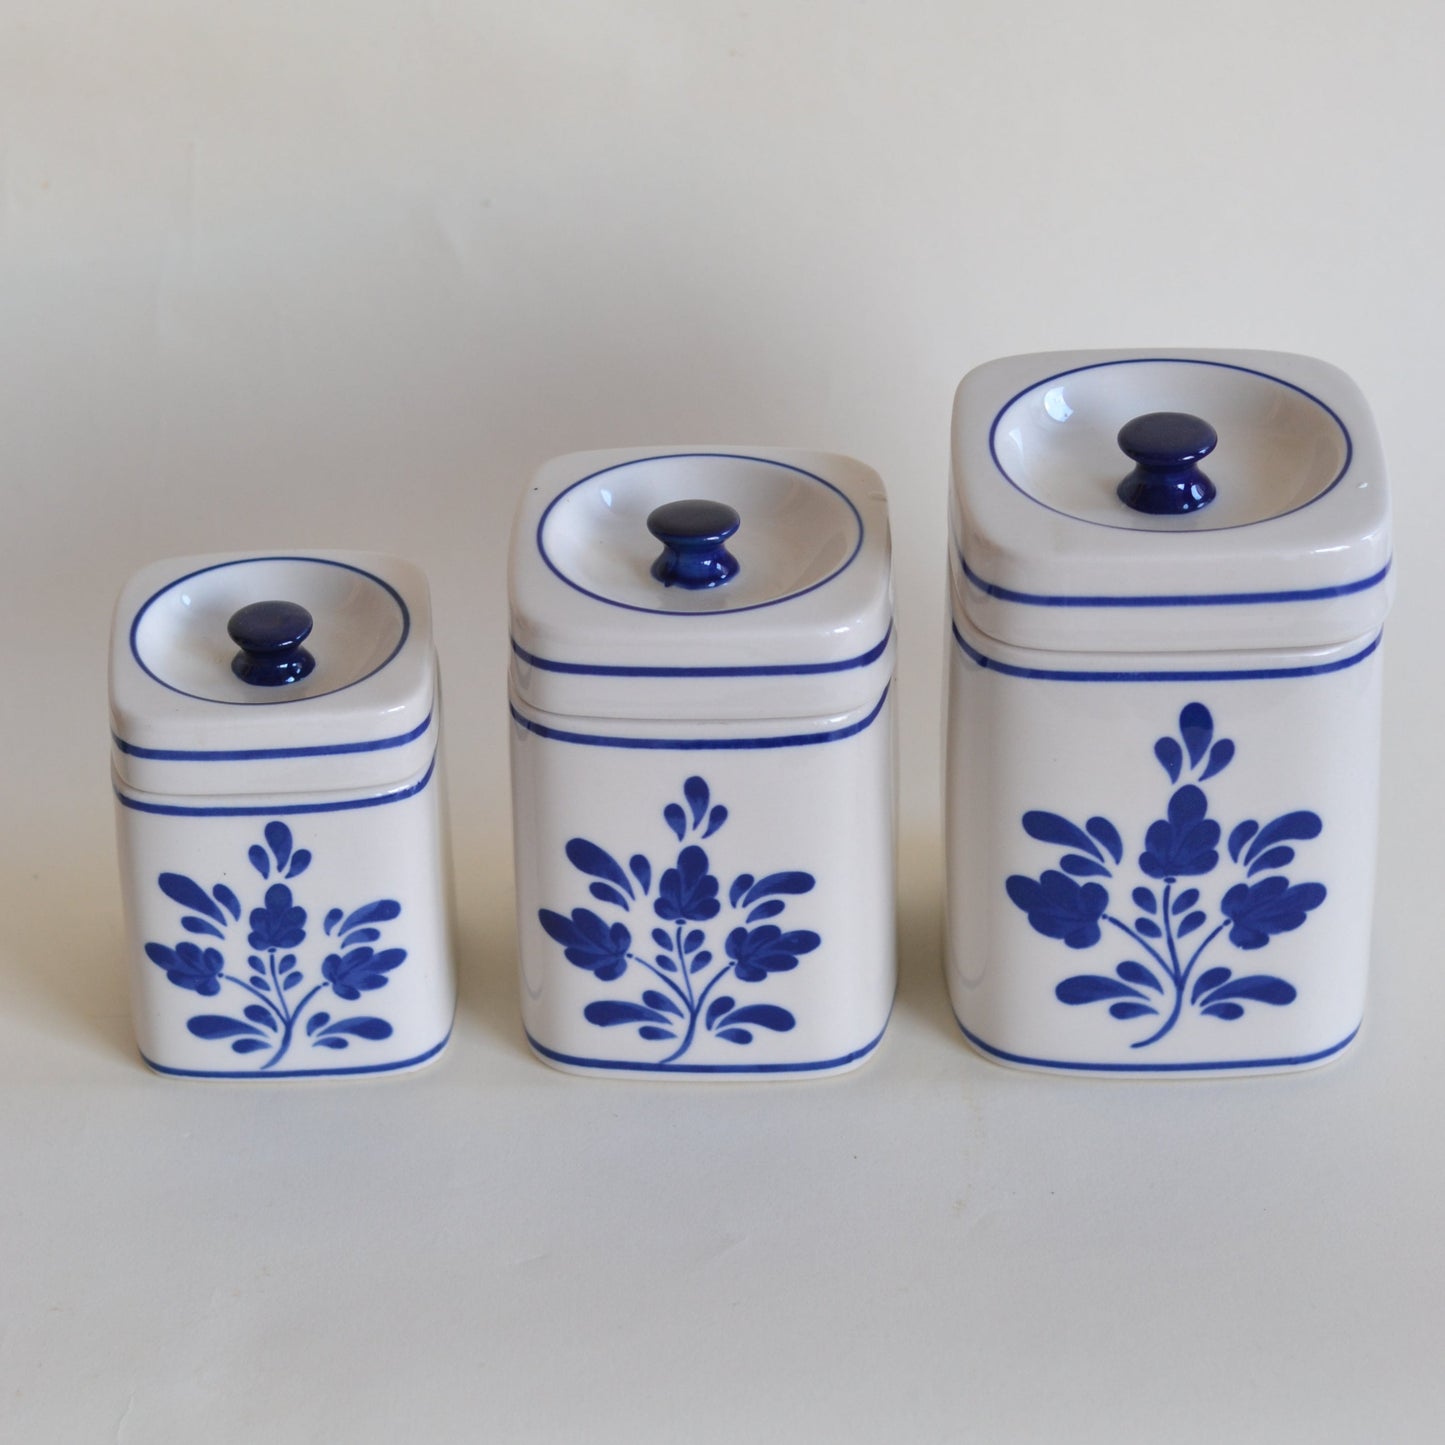 Rowe Ceramic Canister Set of 3